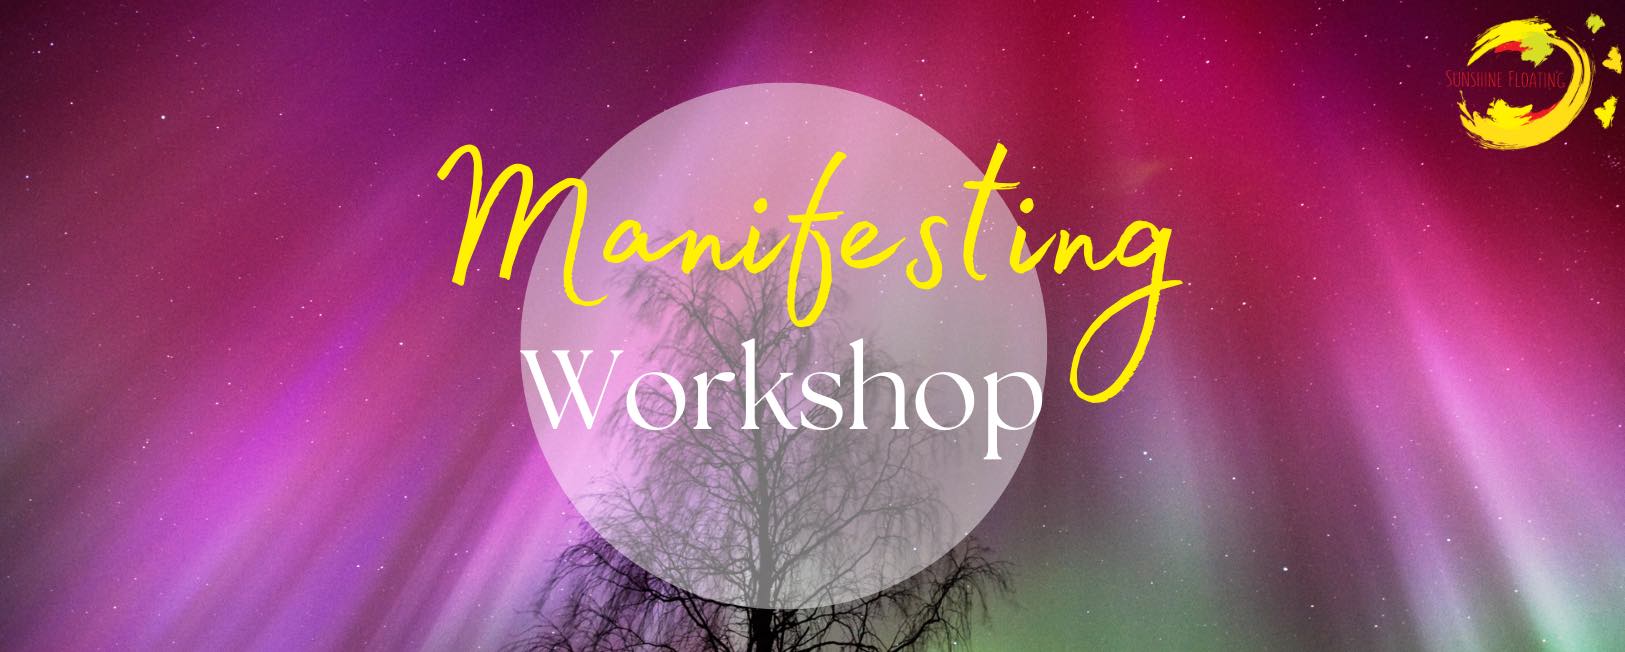 how-to-manifest-free-wellbeing-resources-sunshinefloating-2